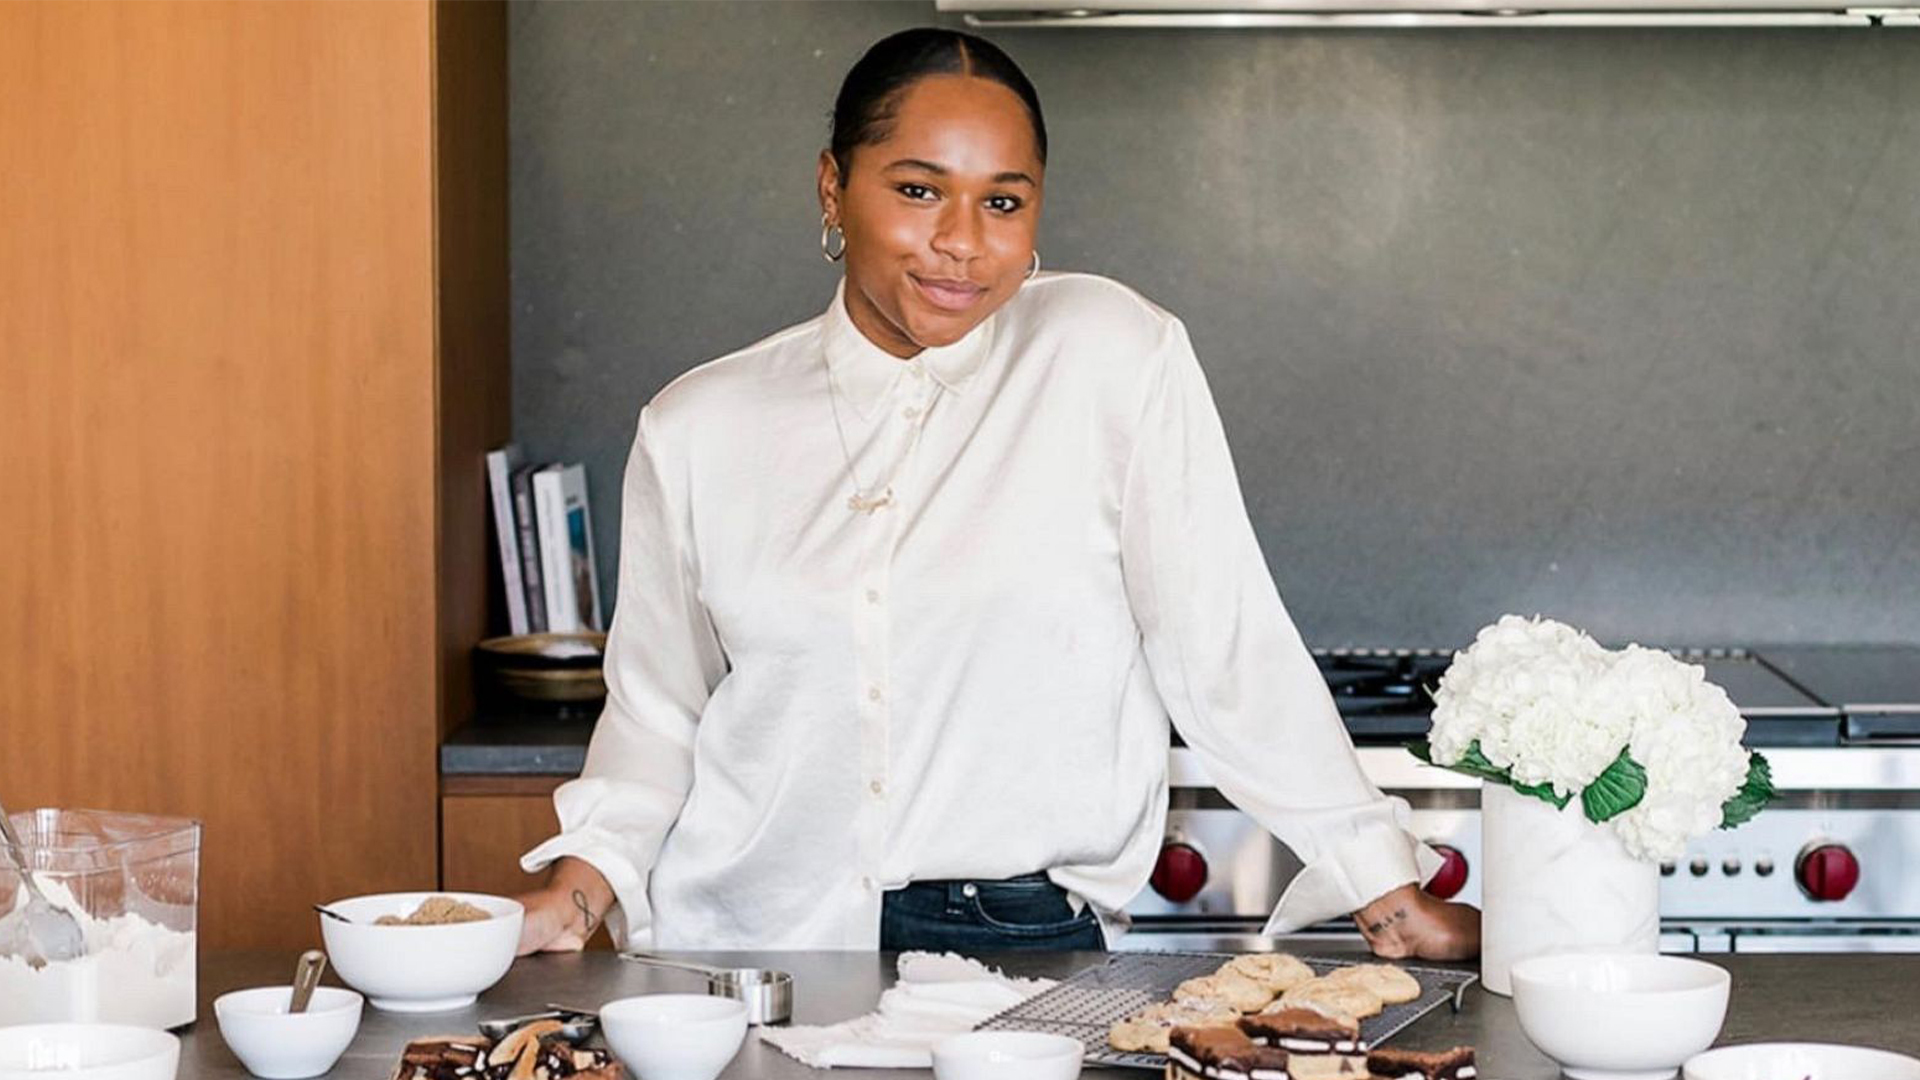 This 28-Year-Old's Pandemic Hobby Turned Into A Booming Bakery Business With Celebrity Clientele